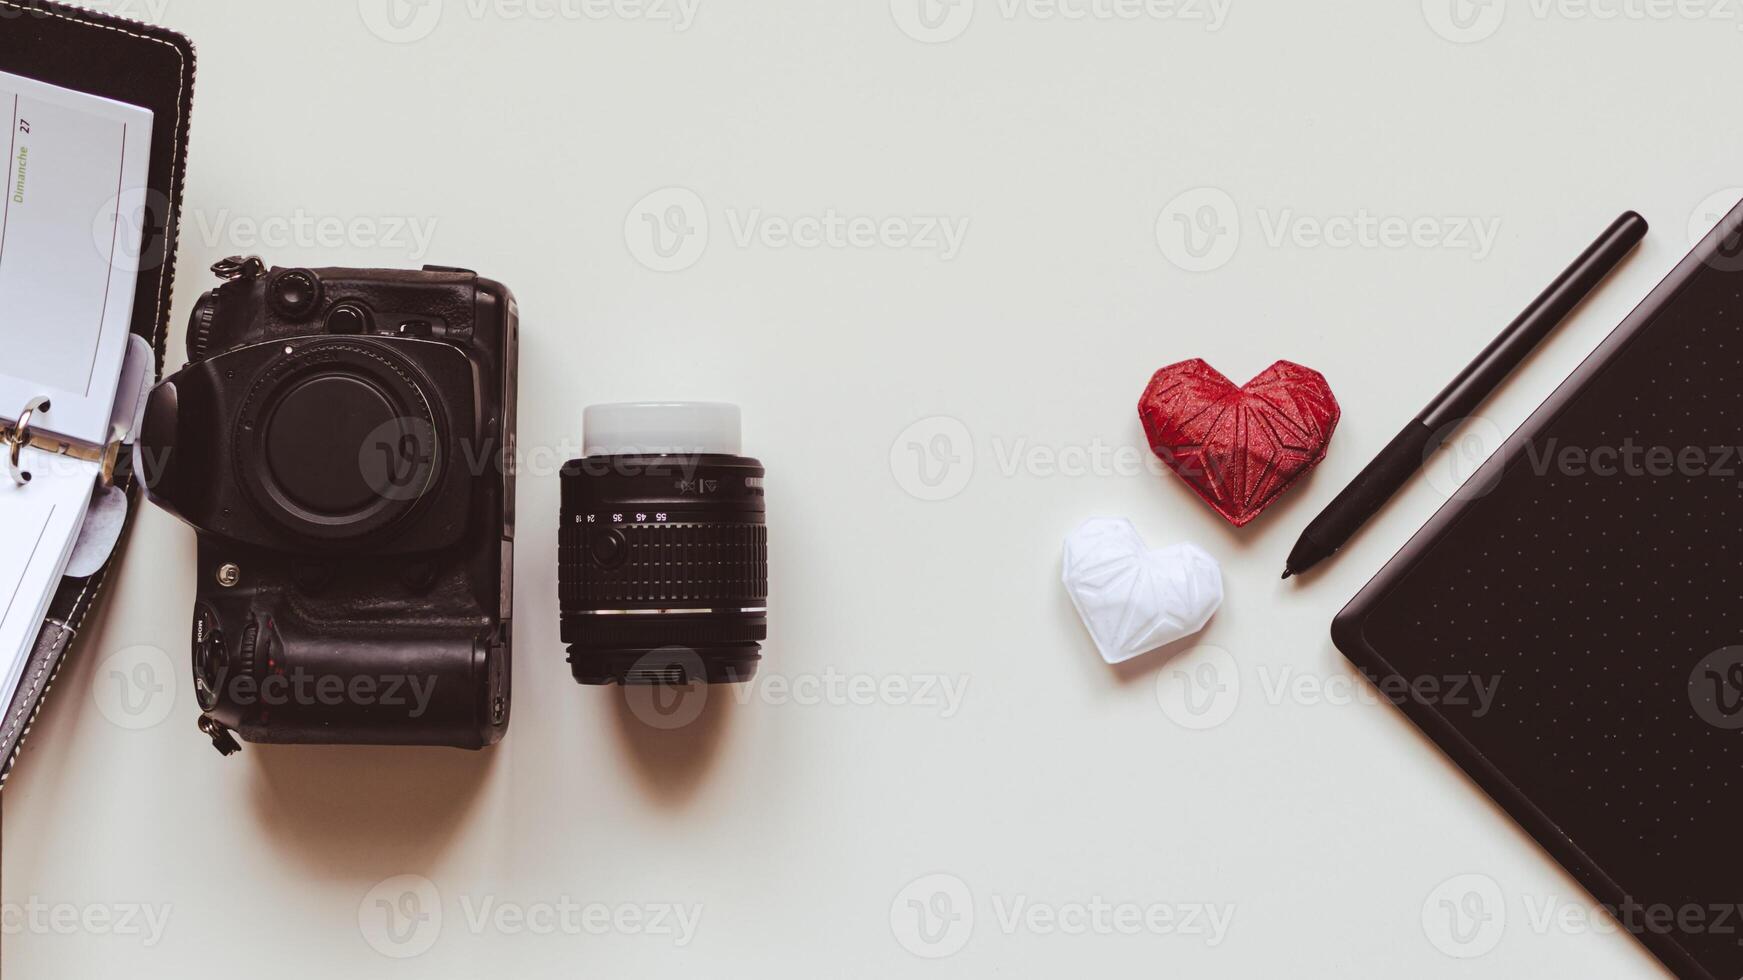 Graphic designer workstation with dslr, lens, agenda, stylus and heart printed in 3d photo